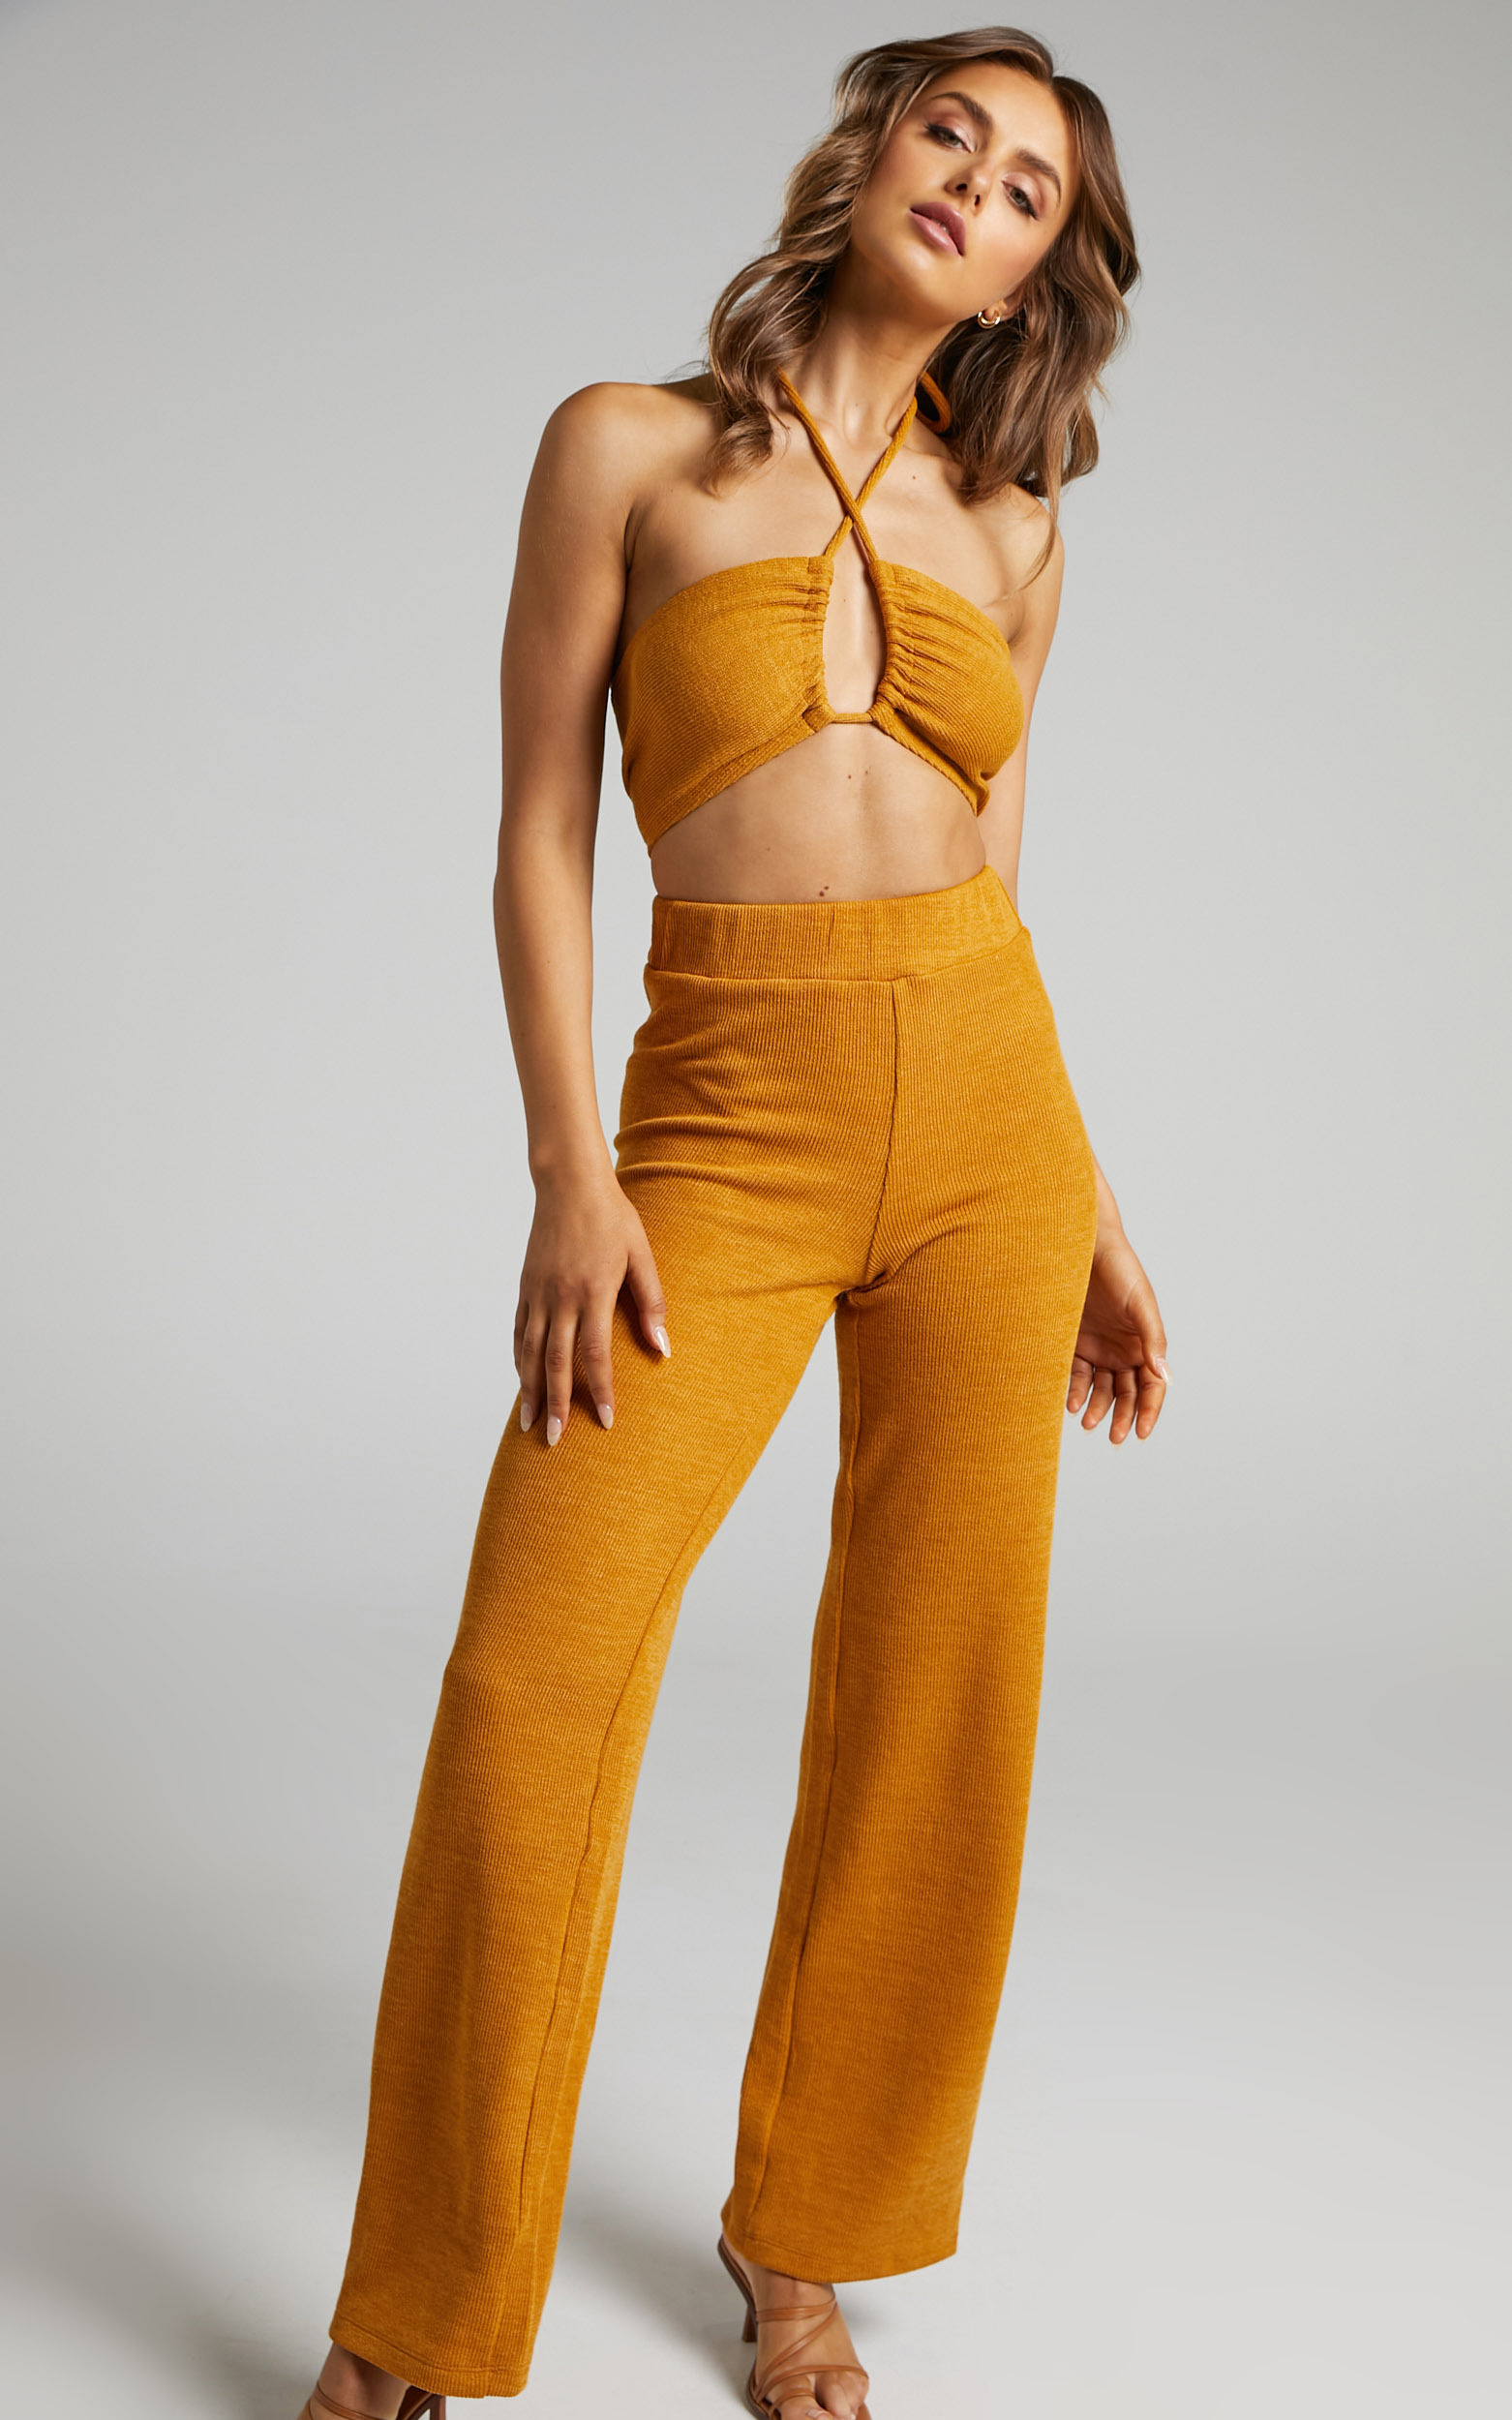 Juliann Knit Two Piece Pant Set with Crop Top in Marigold - 04, YEL3, hi-res image number null